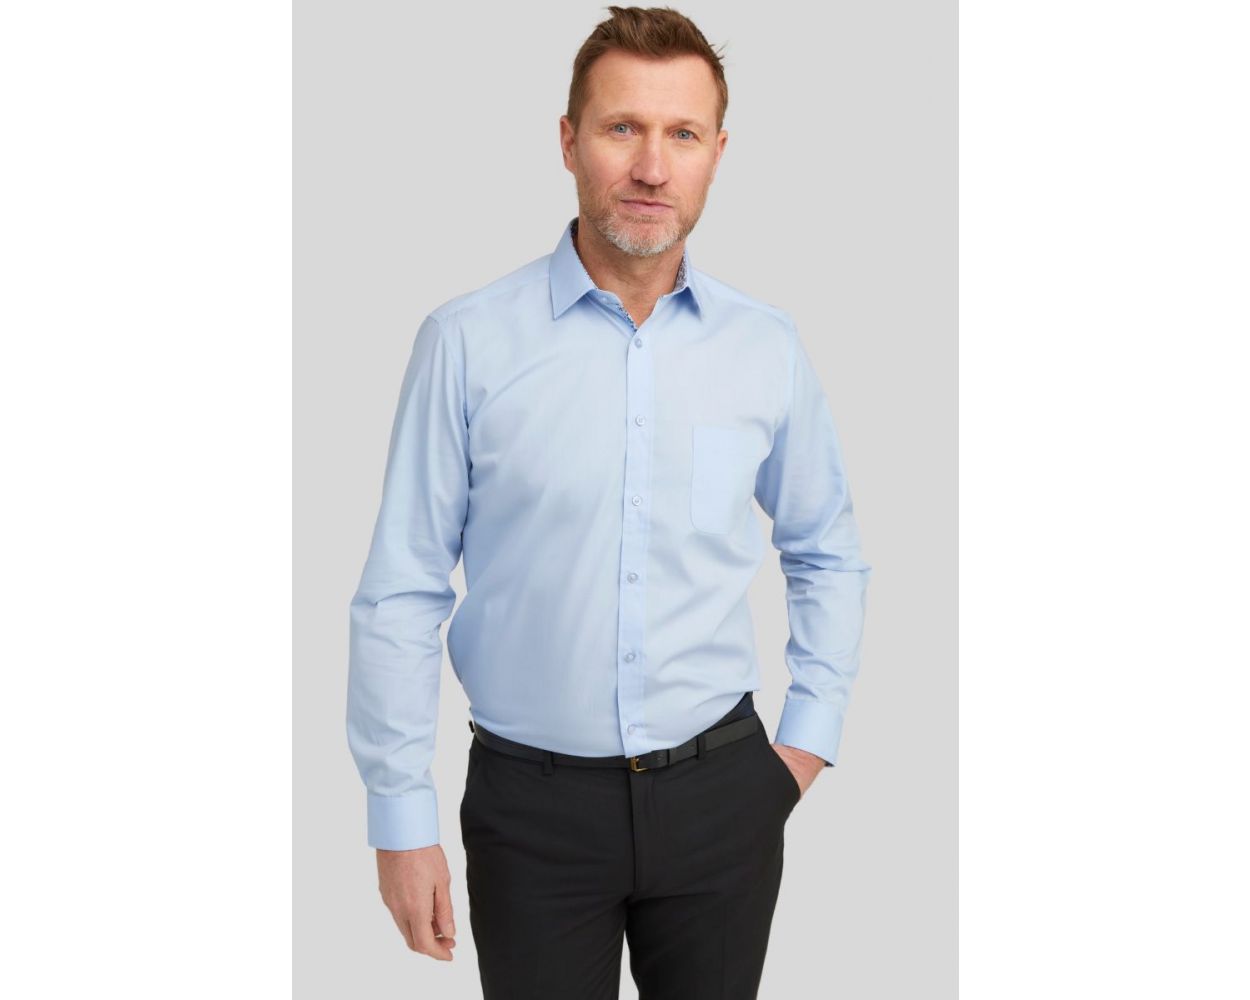 Glacier Blue Long Sleeve Non-Iron Shirt with Floral Contrast Trim